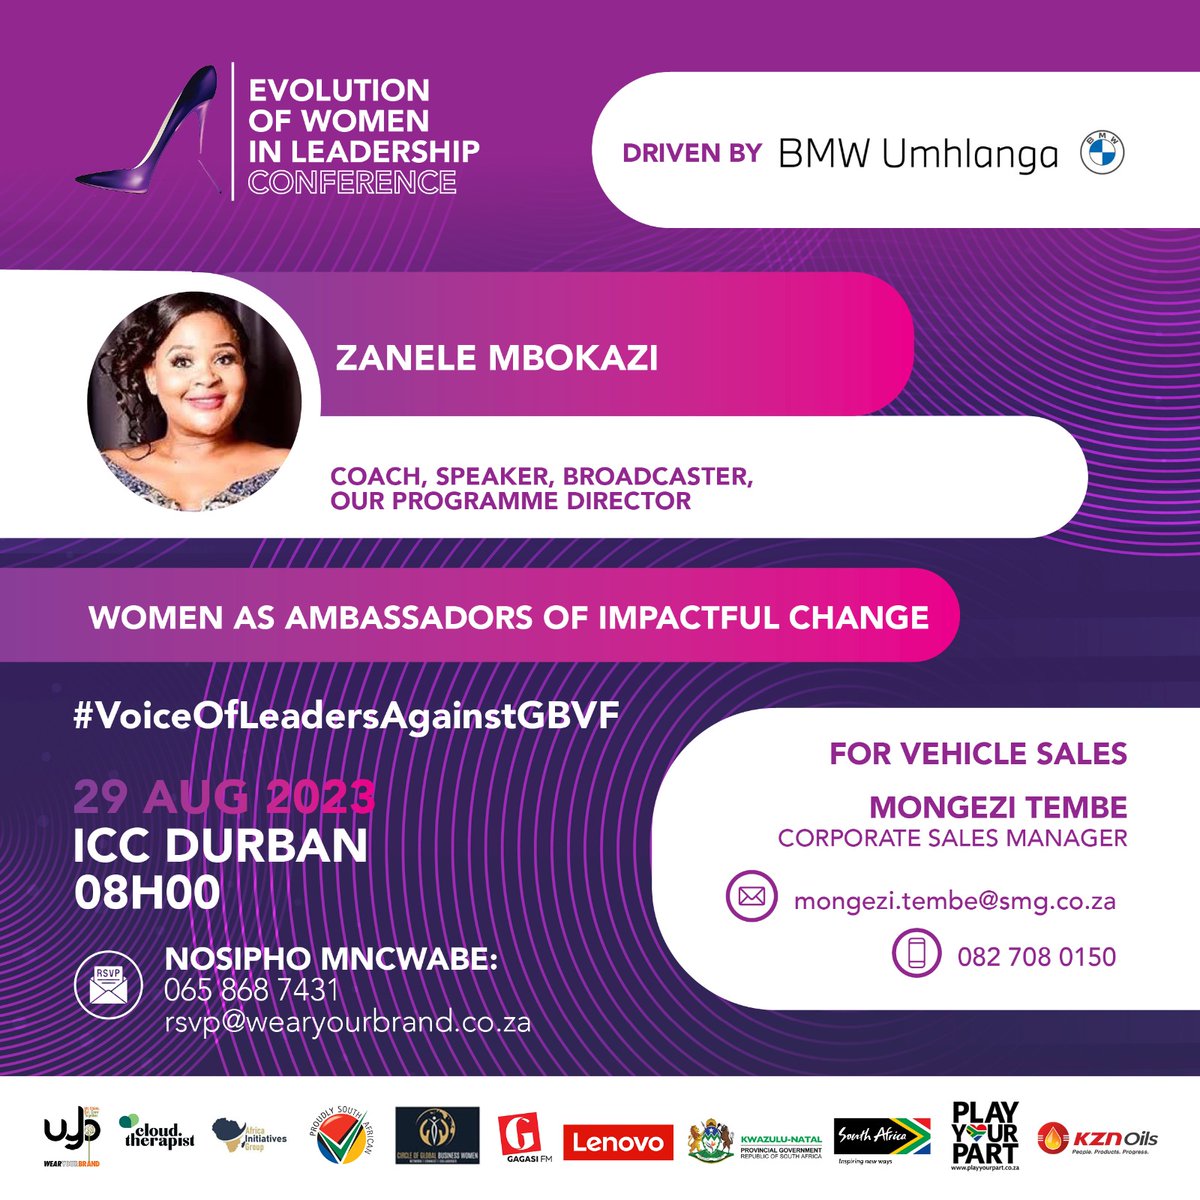 Amongst other notable women leaders joining us this August for our conference on #gbvf is @zanelembokazi

'Women as ambassadors of impactful change.'

#VoiceOfLeadersAgainstGBVF #EWLC2023 #gbvf #awareness #conference